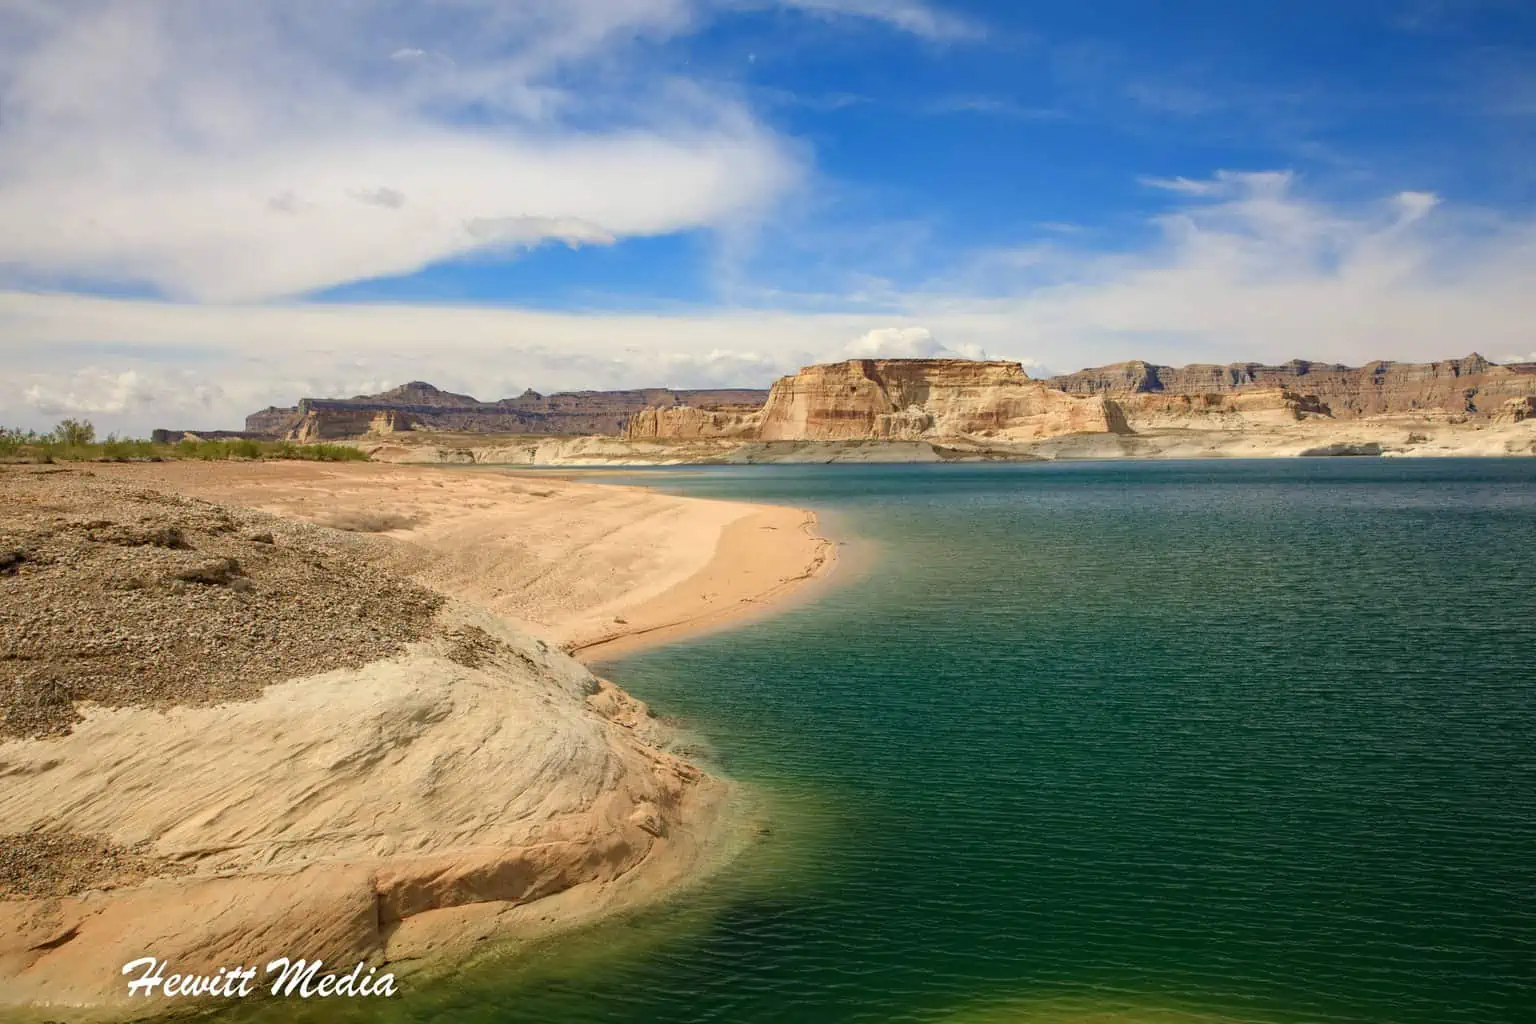 Southern Utah Attractions - Glen Canyon National Recreation Area